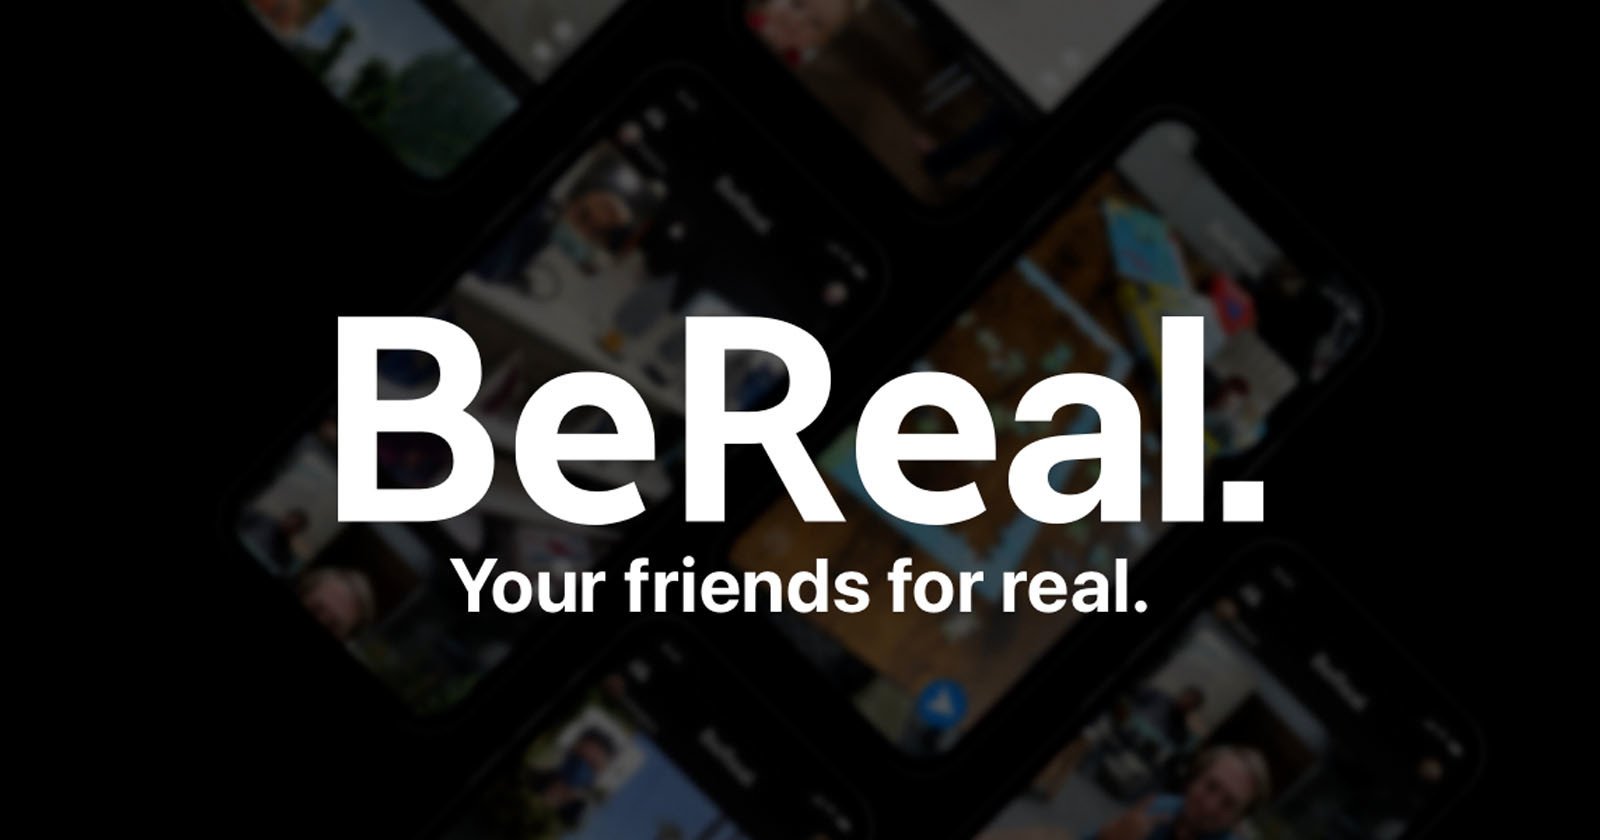 BeReal May Be On the Out: Users Have Nearly Halved Since Peak